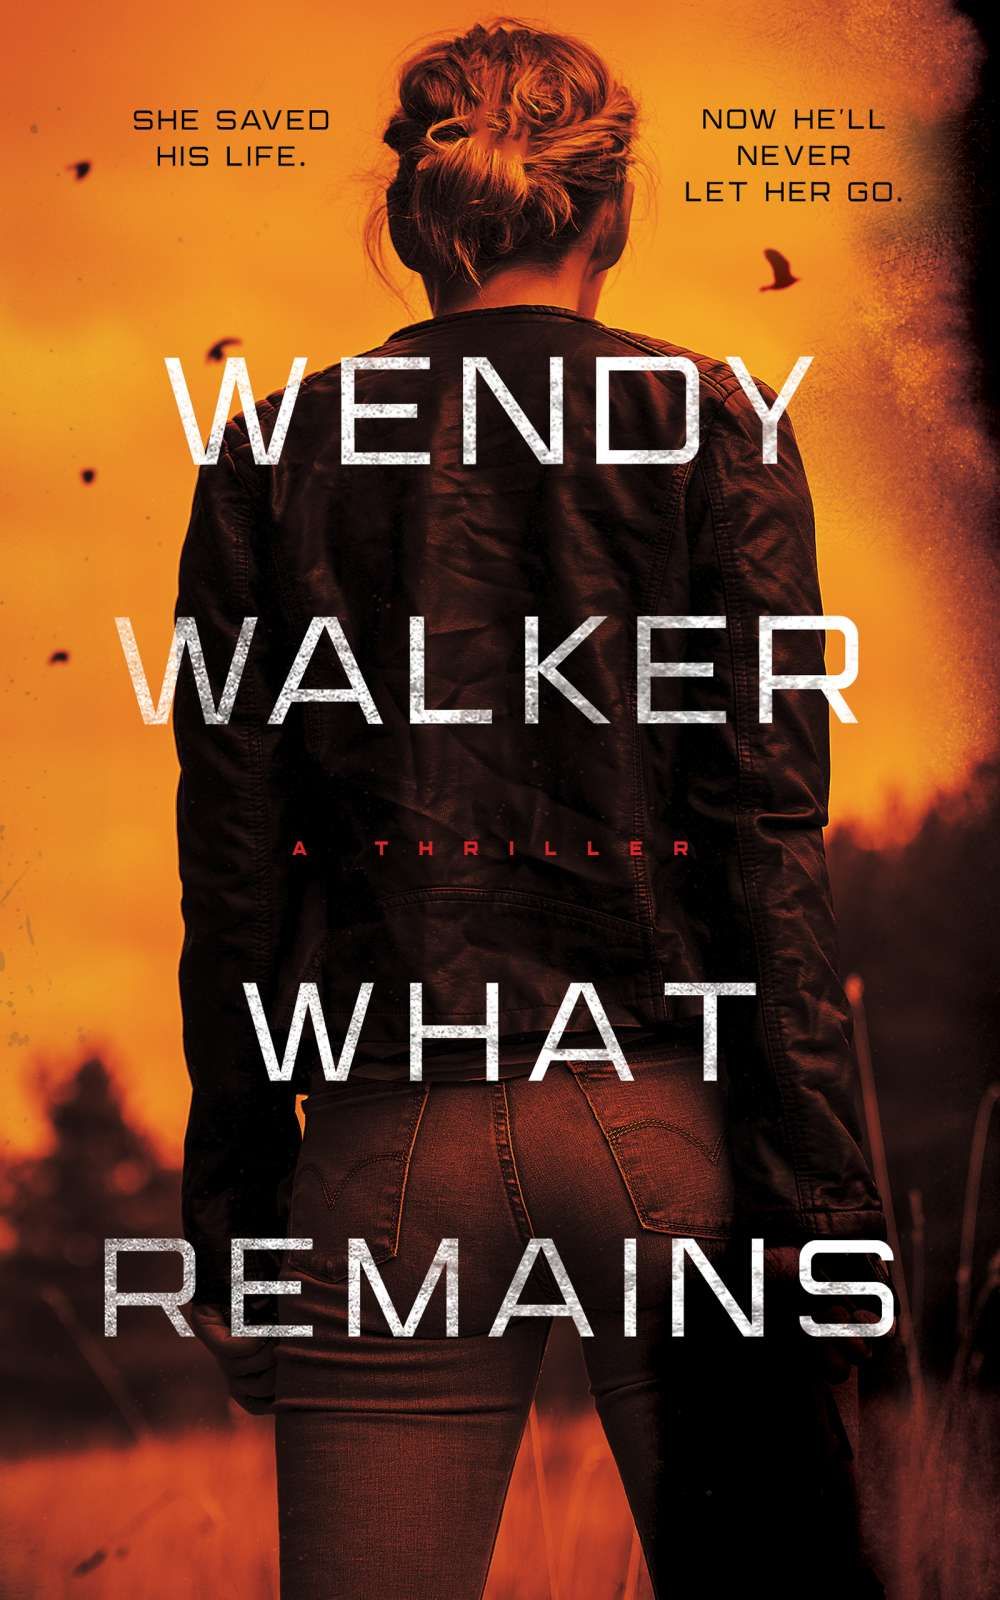 What Remains trade paperback cover